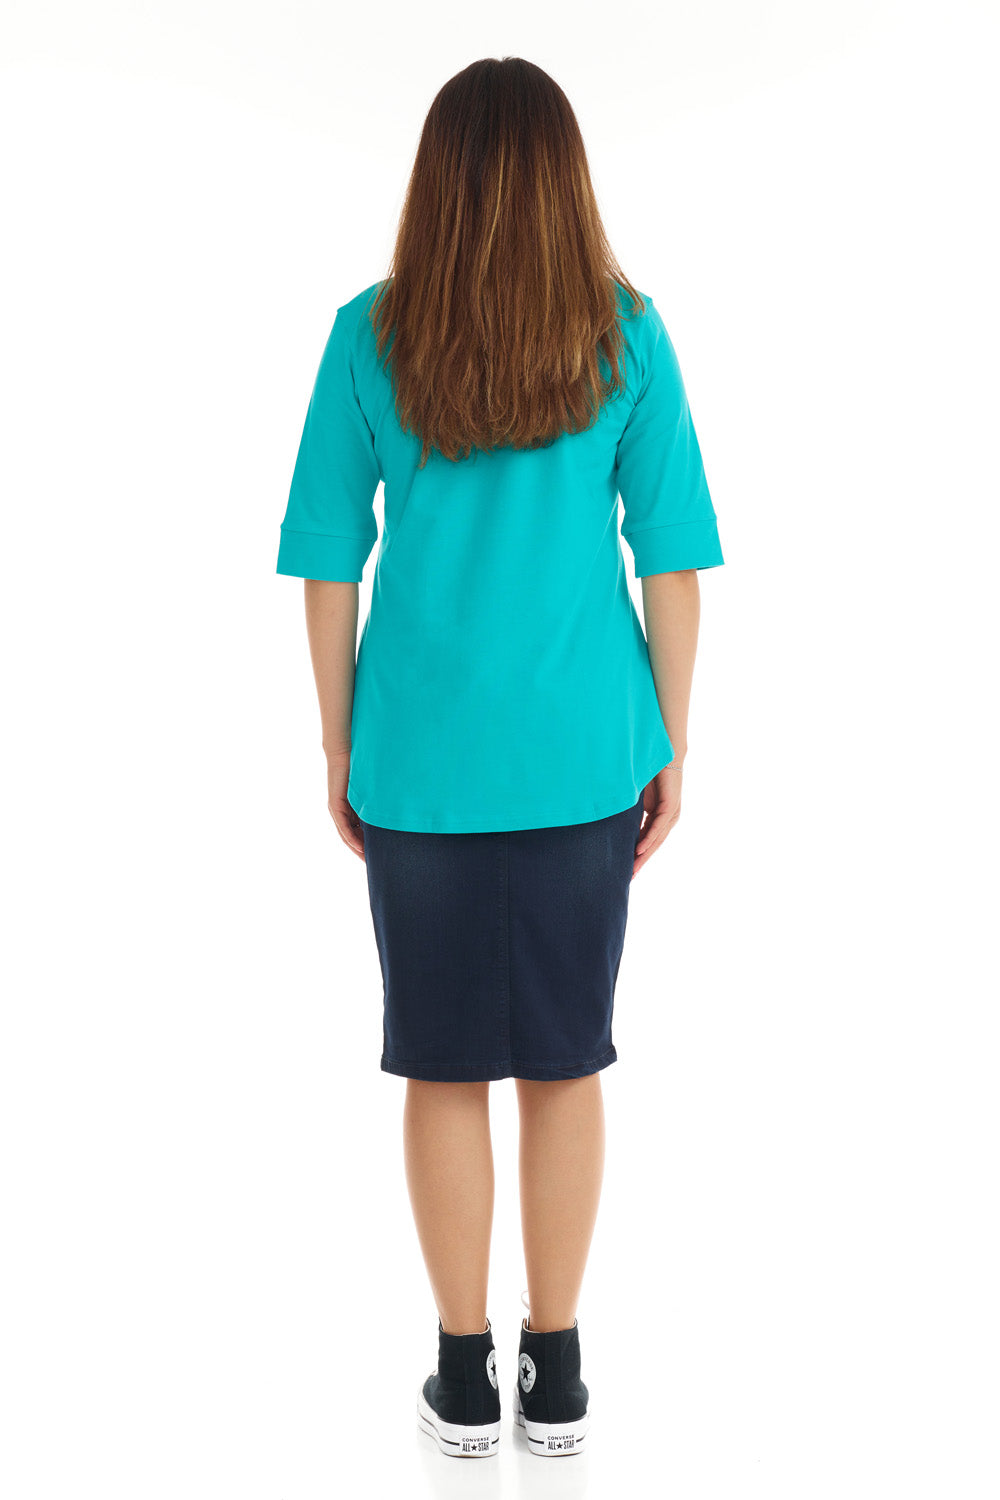 turquoise 3/4 cuff sleeve tshirt for women